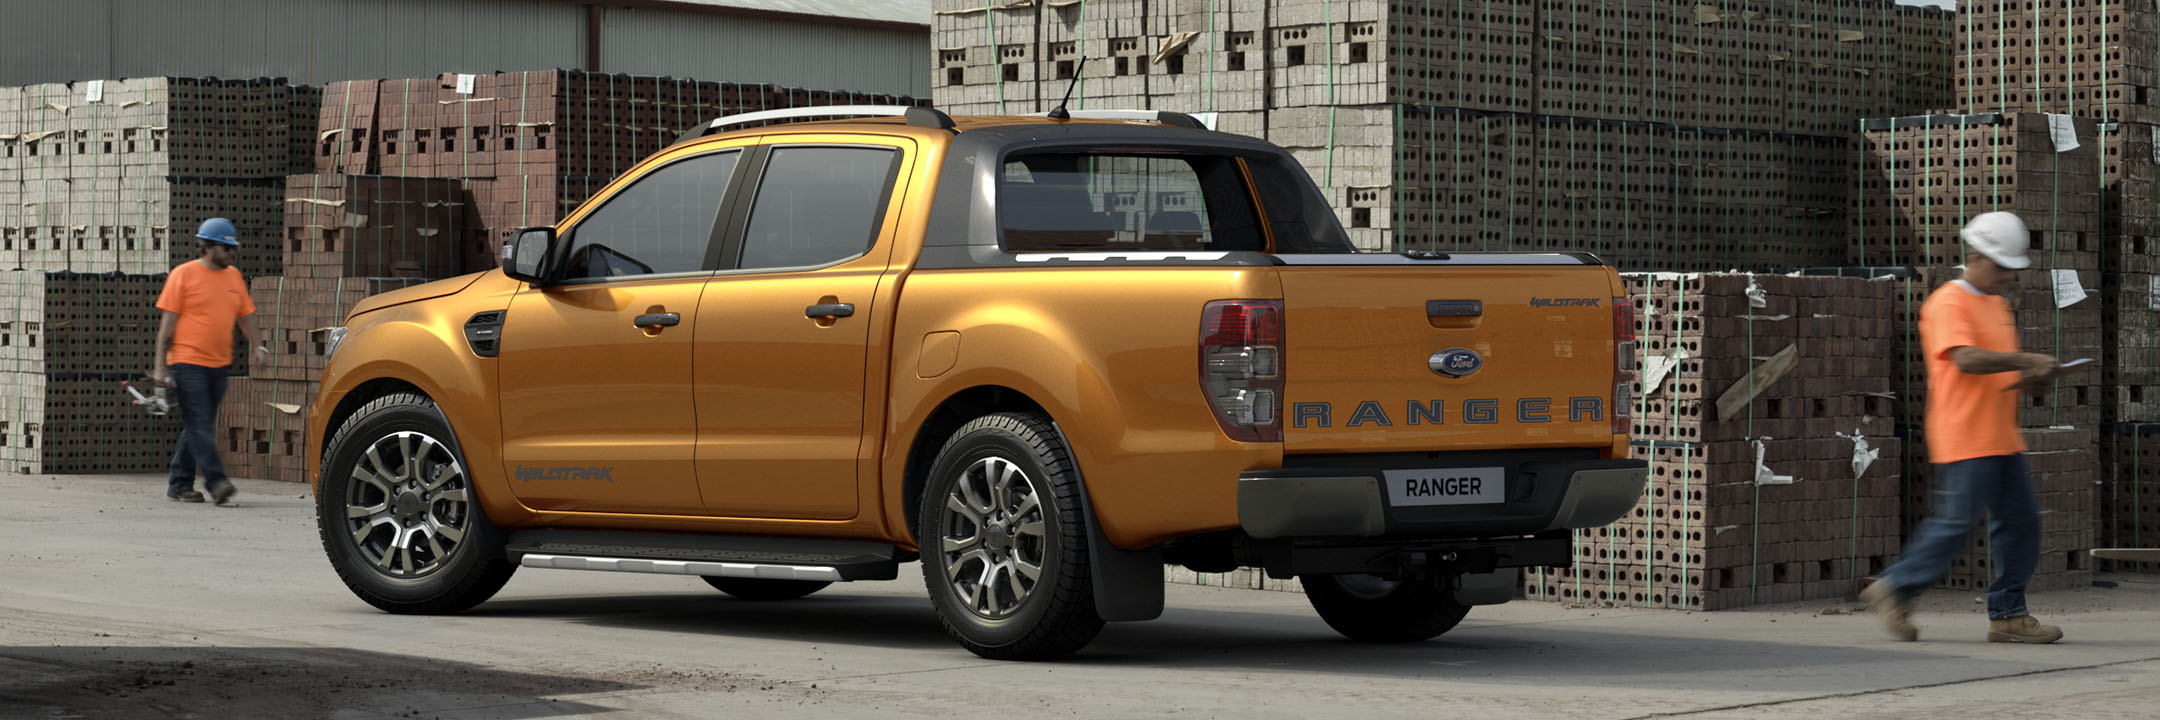 Rear shot of an orange Ford Ranger Wildtrak parked at a building site with two workers